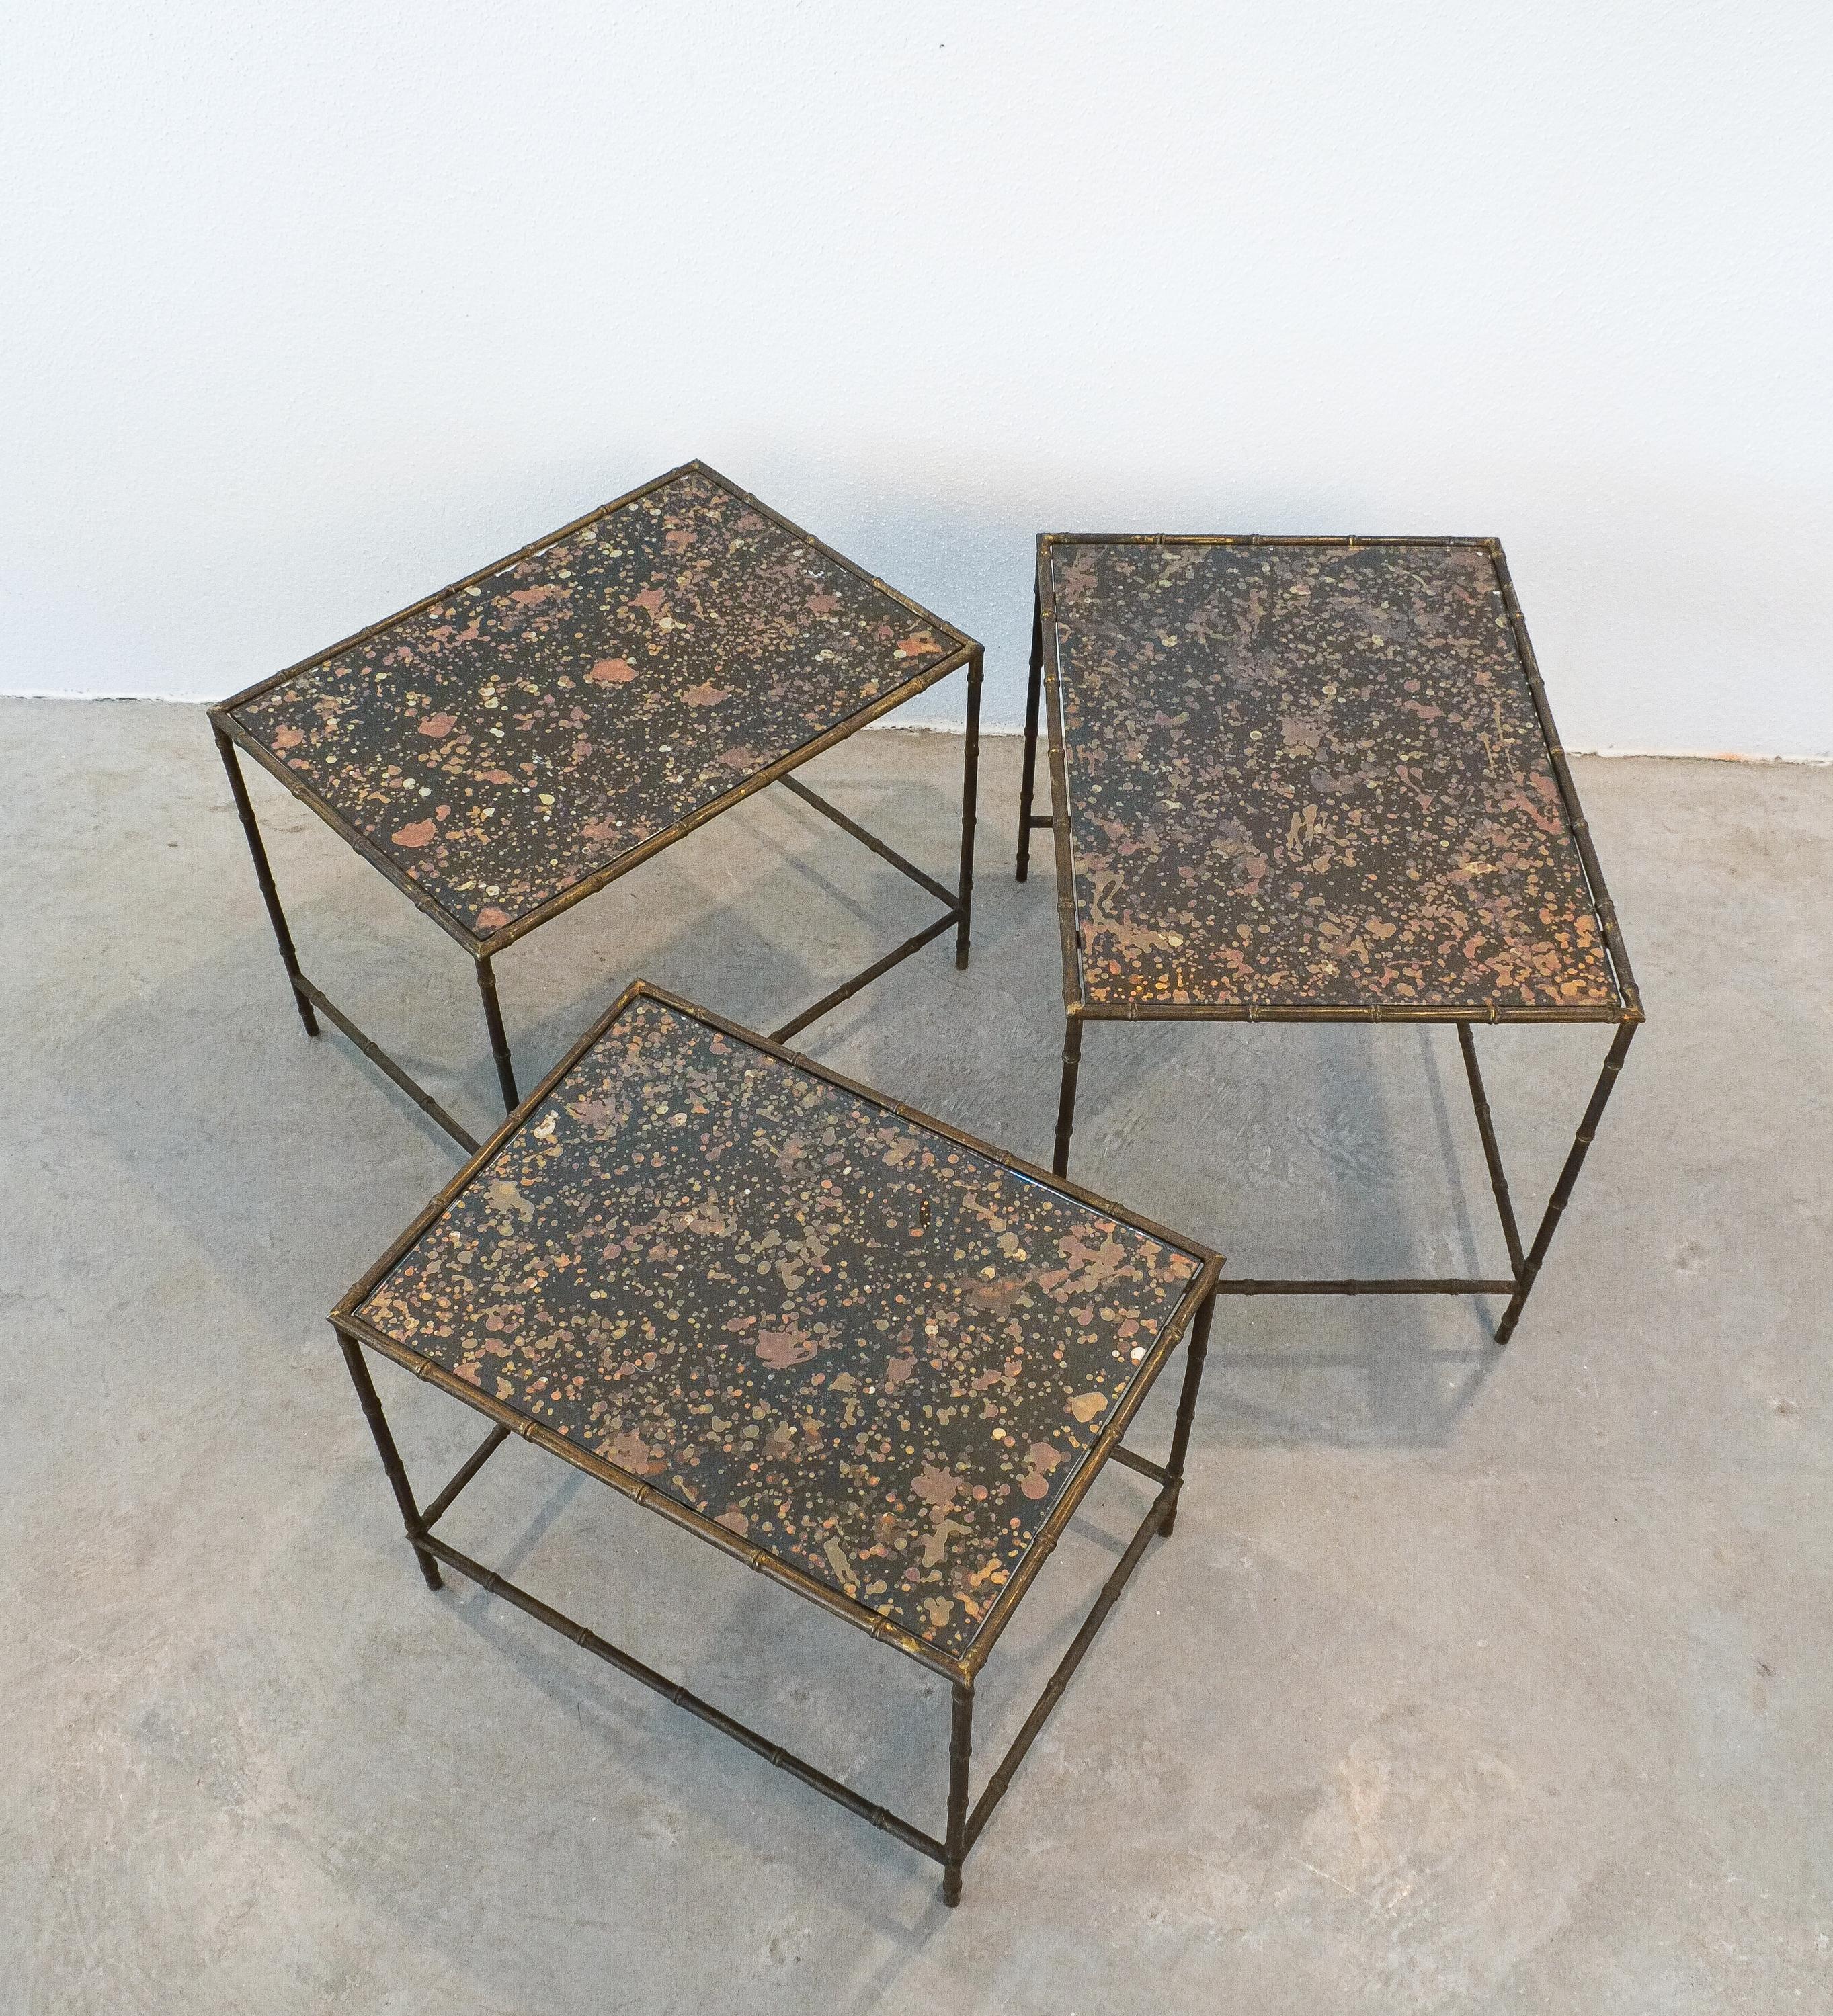 Maison Baguès, Very rare set of 3 nesting tables, France.

The base is made from bamboo brass typical for Maison Bagues, the glass top has got the original silver and gold reflecting mirror still intact. The production of these glass tops was a